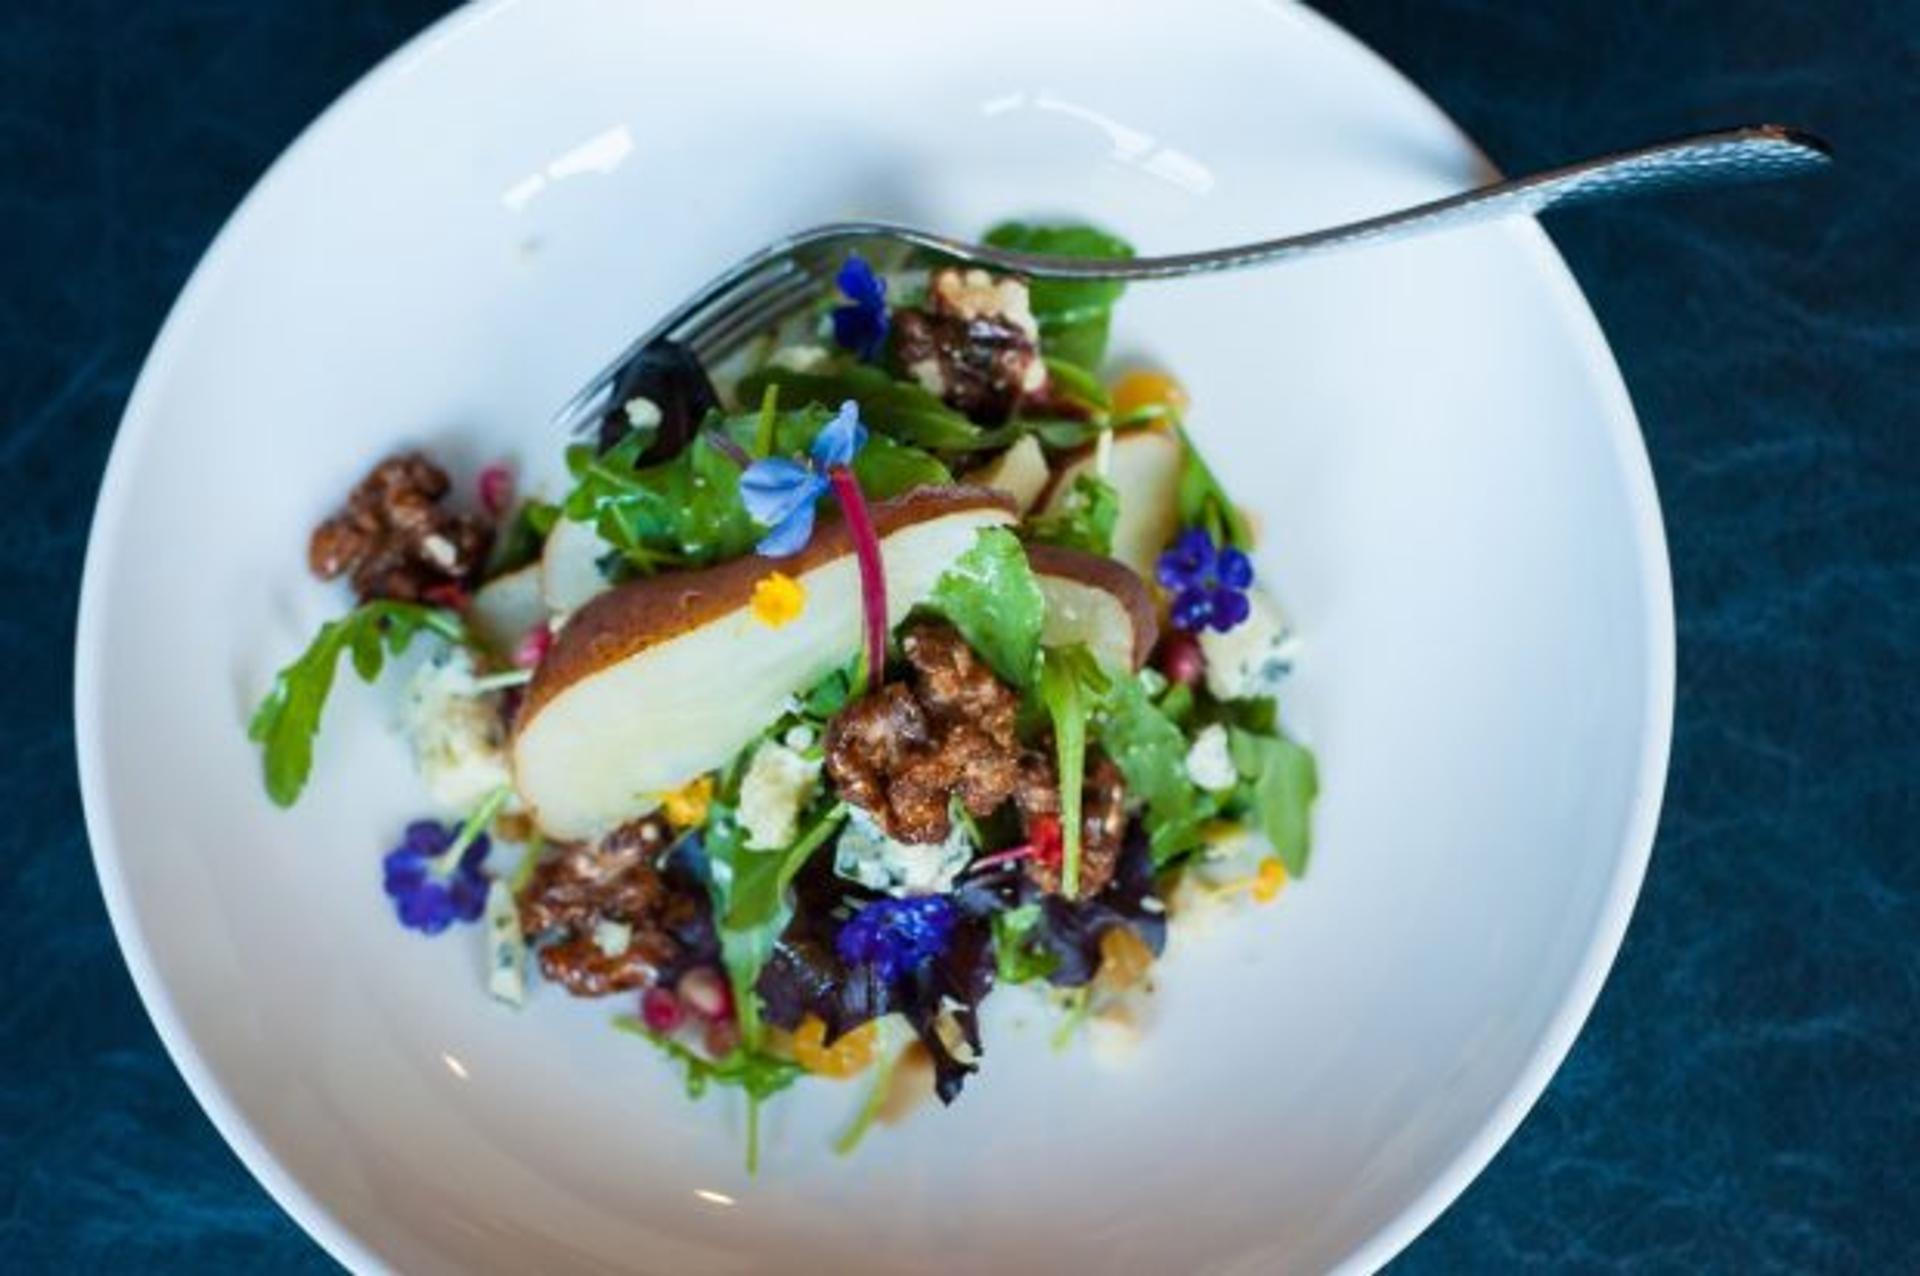 Overhead view of a colorful salad of apples, candied walnuts, microgreens, and edible blue flowers.